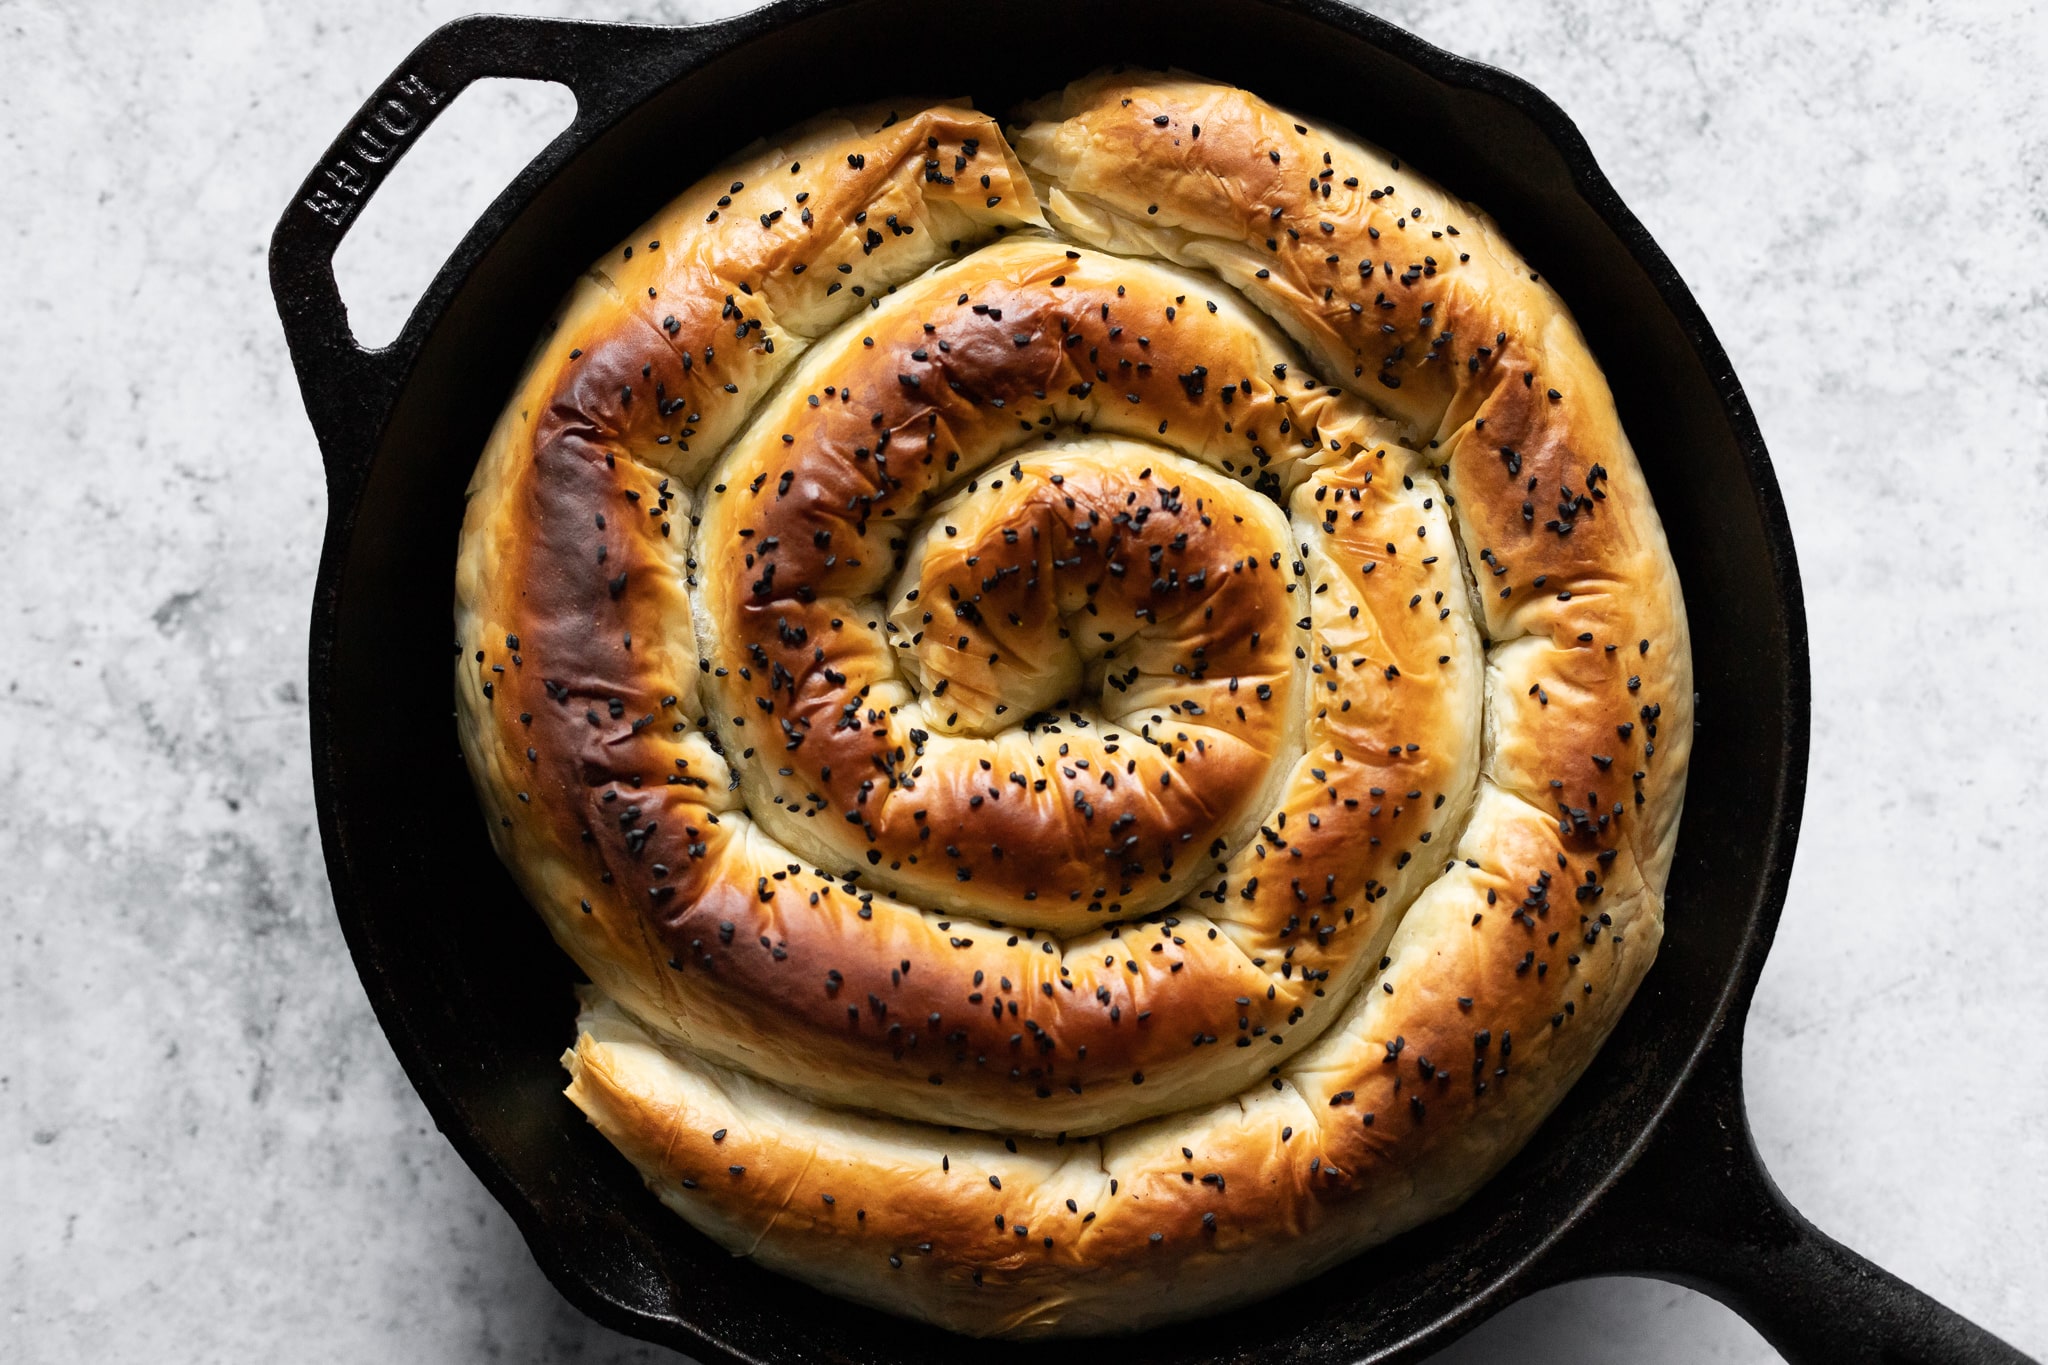 Spanakopita in a spiral, photographed from above